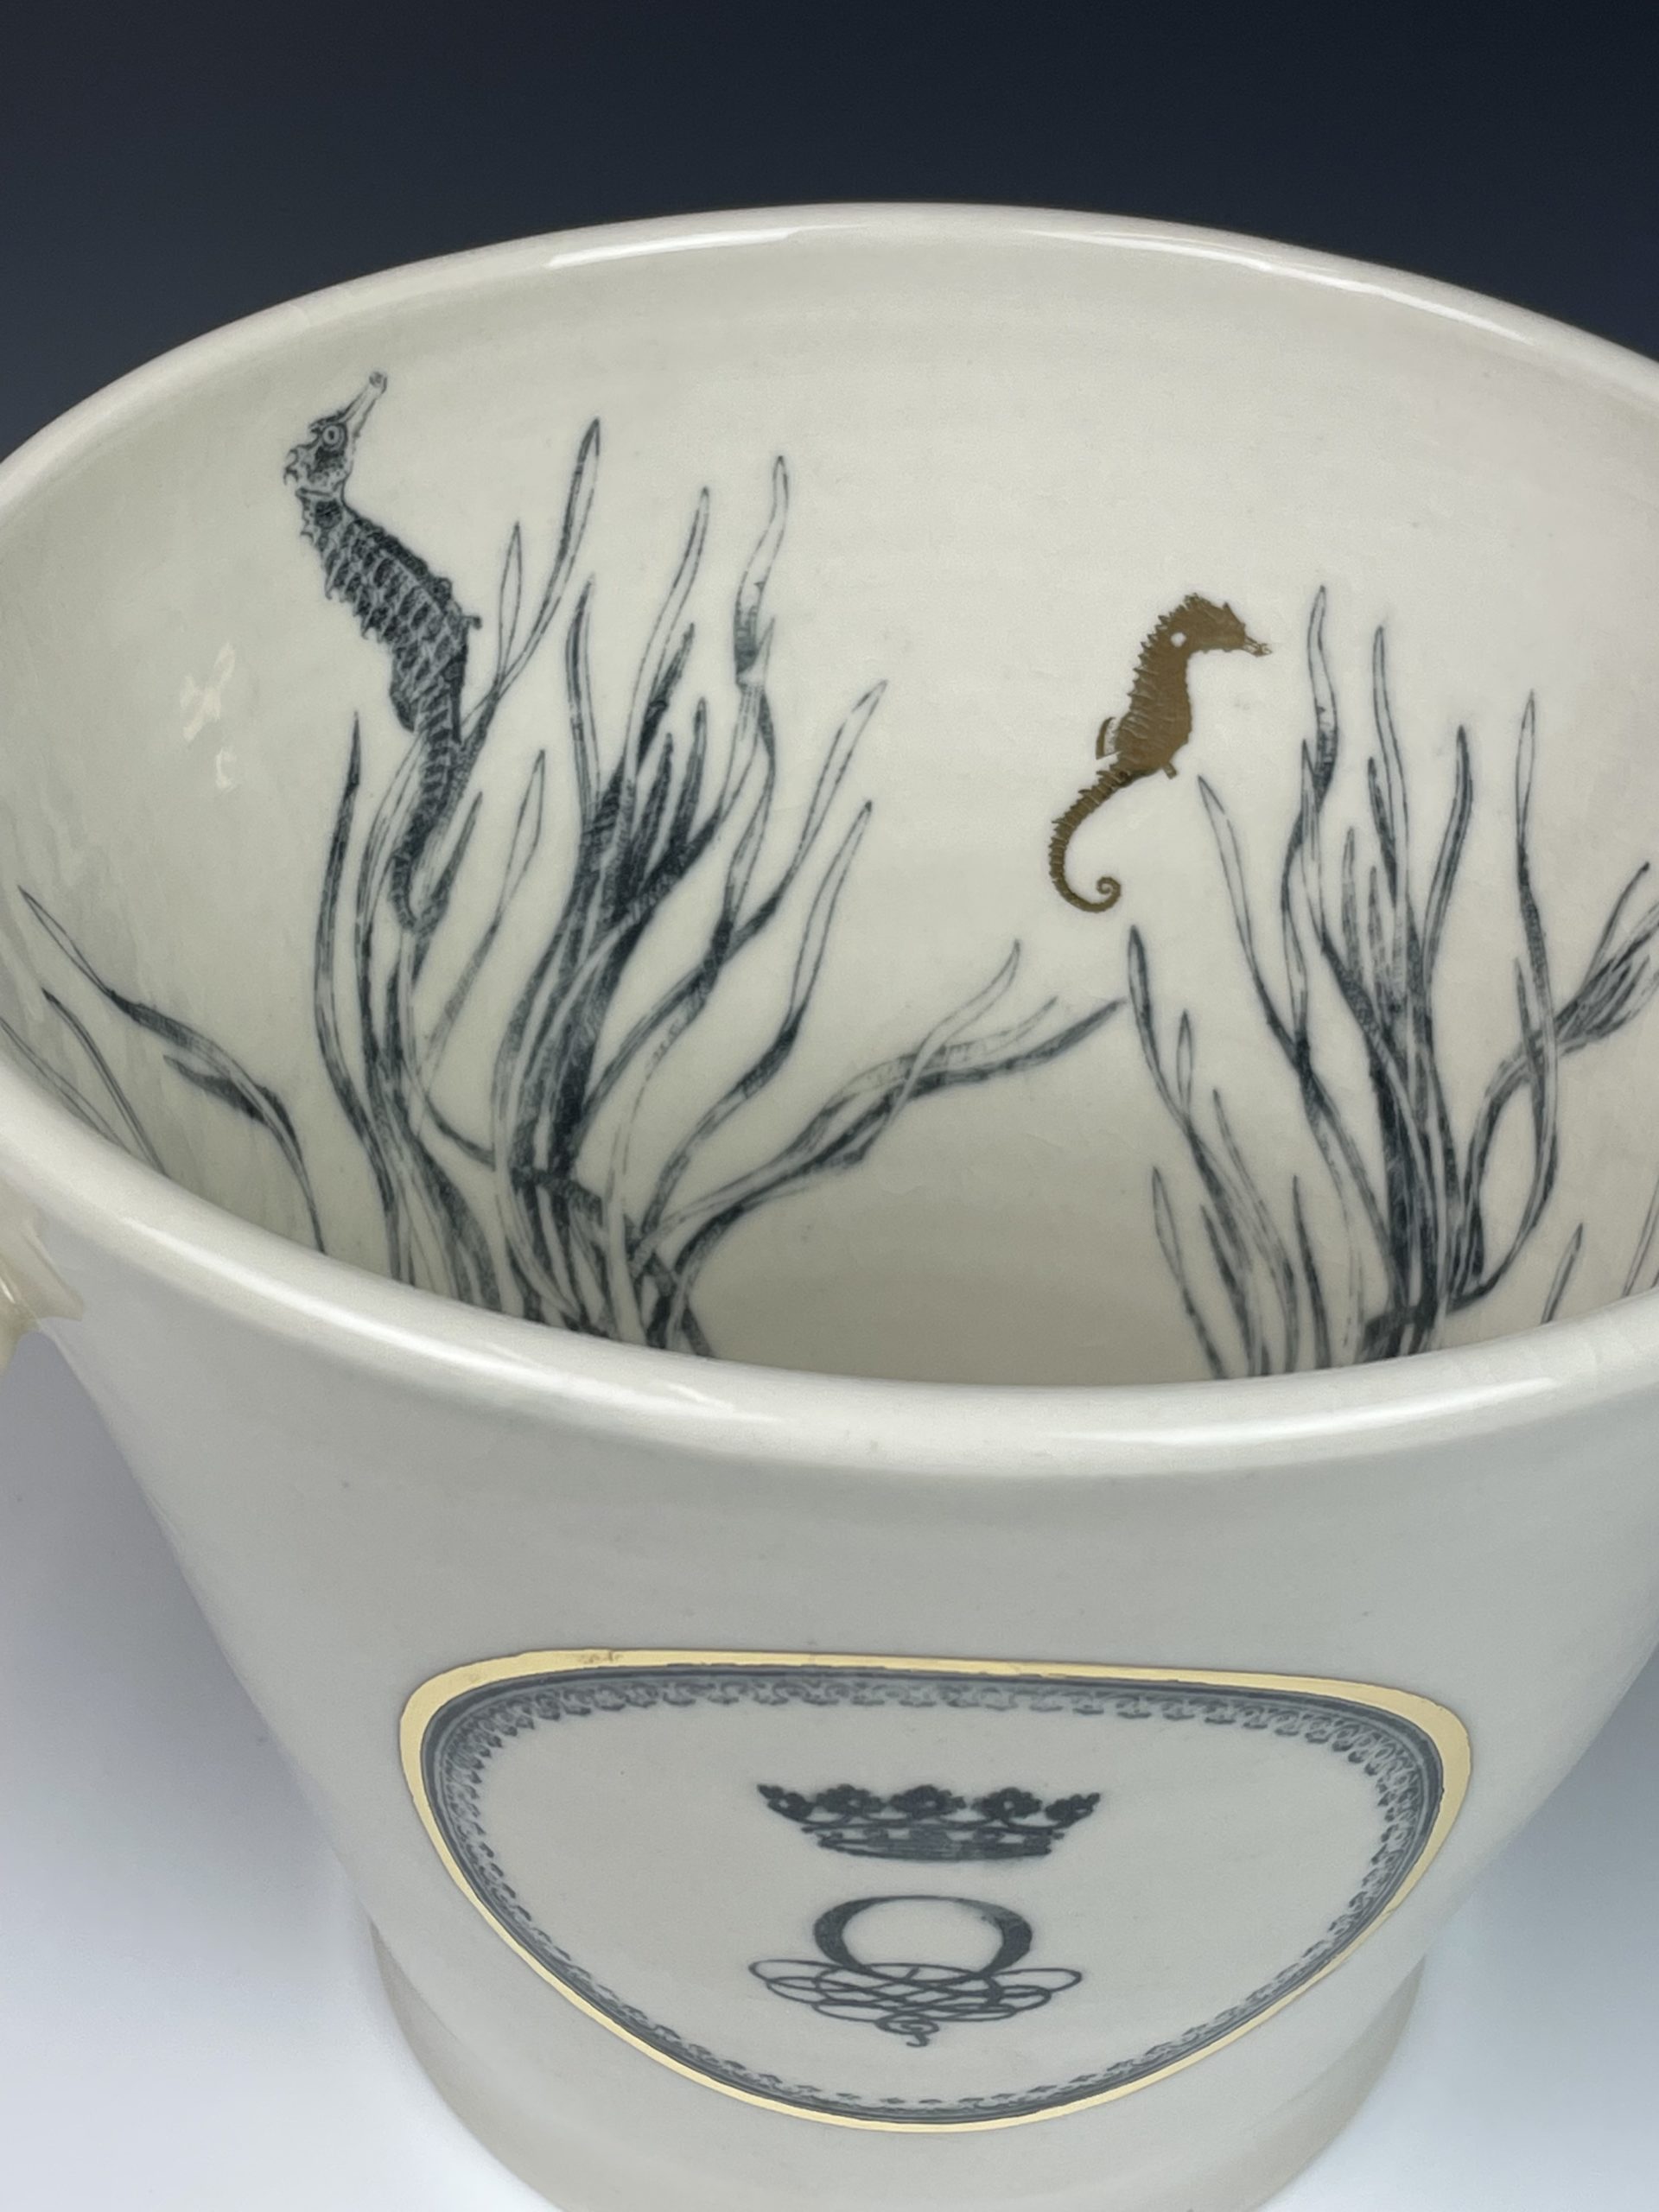 Ocean Wines ice bucket titled forward to show off the interior seahorses and seaweed decorations.